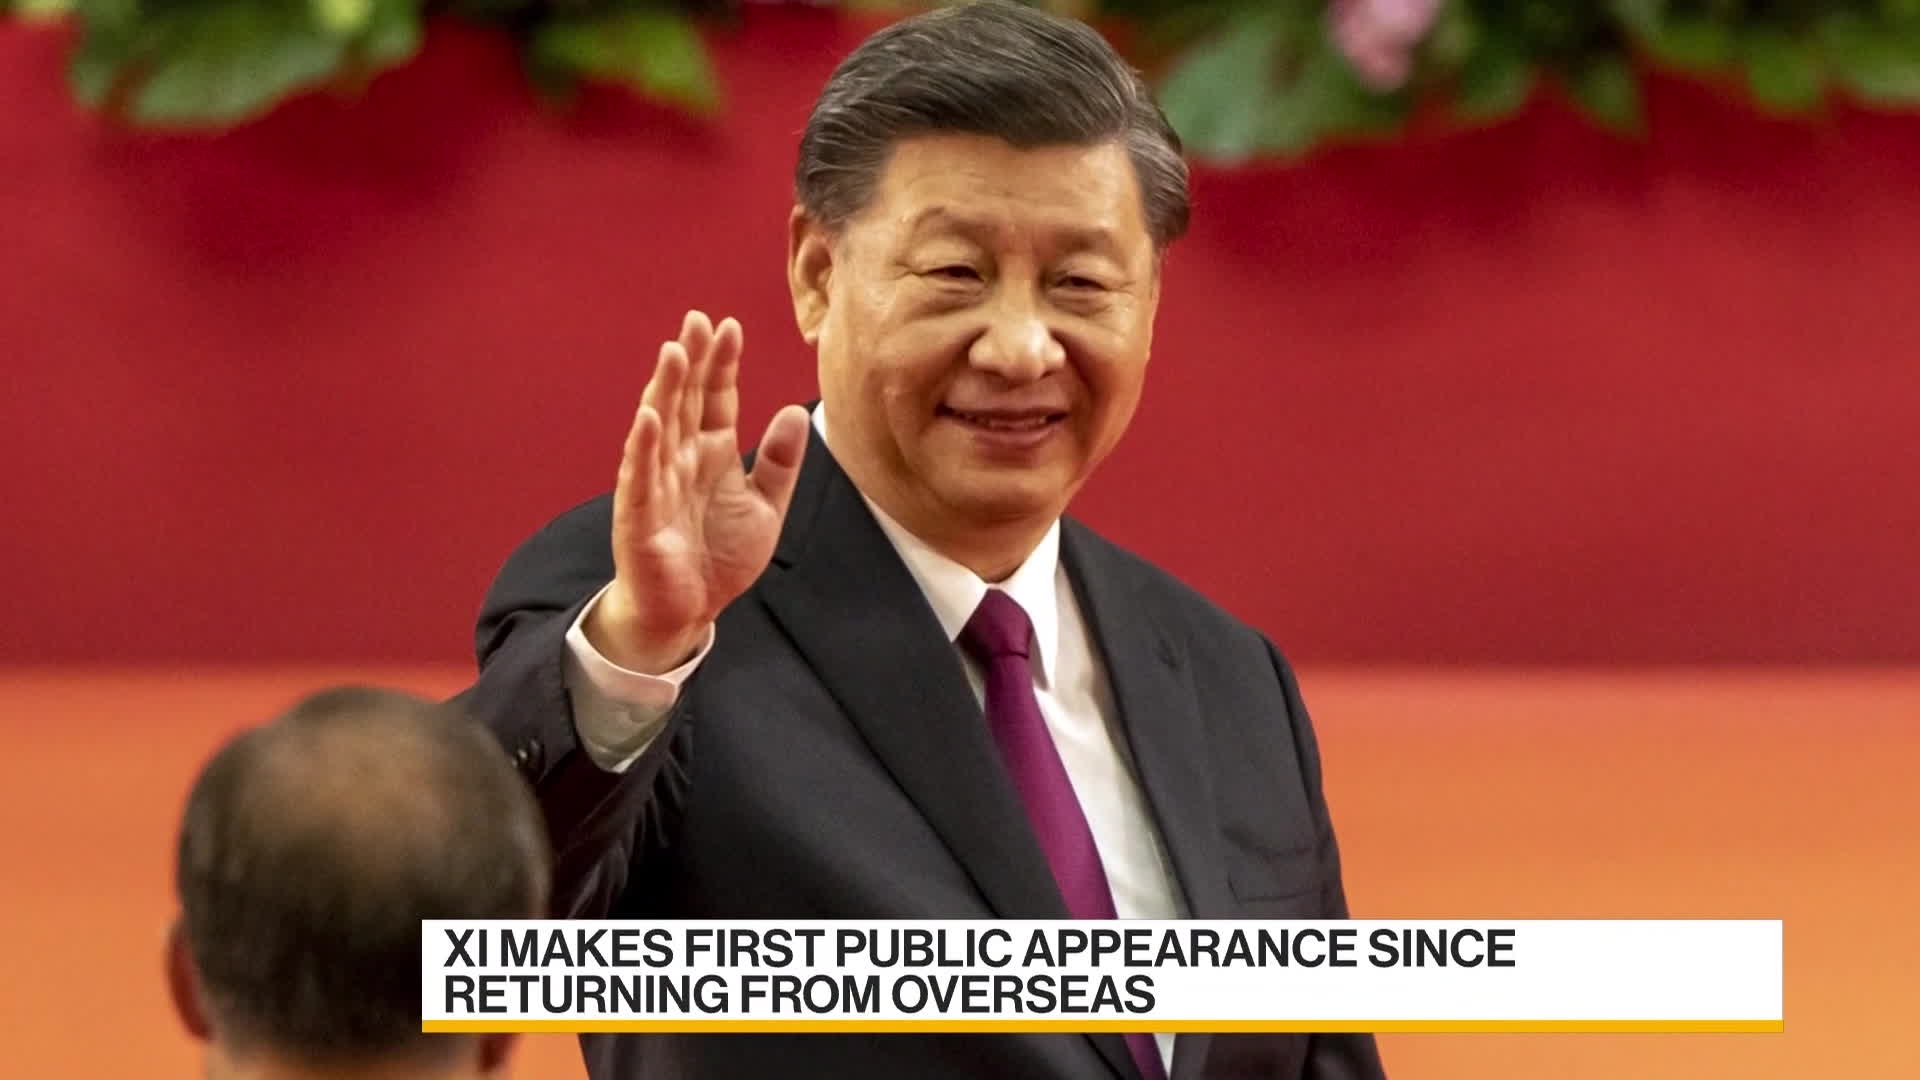 Xi Makes First Public Appearance After Overseas Trip